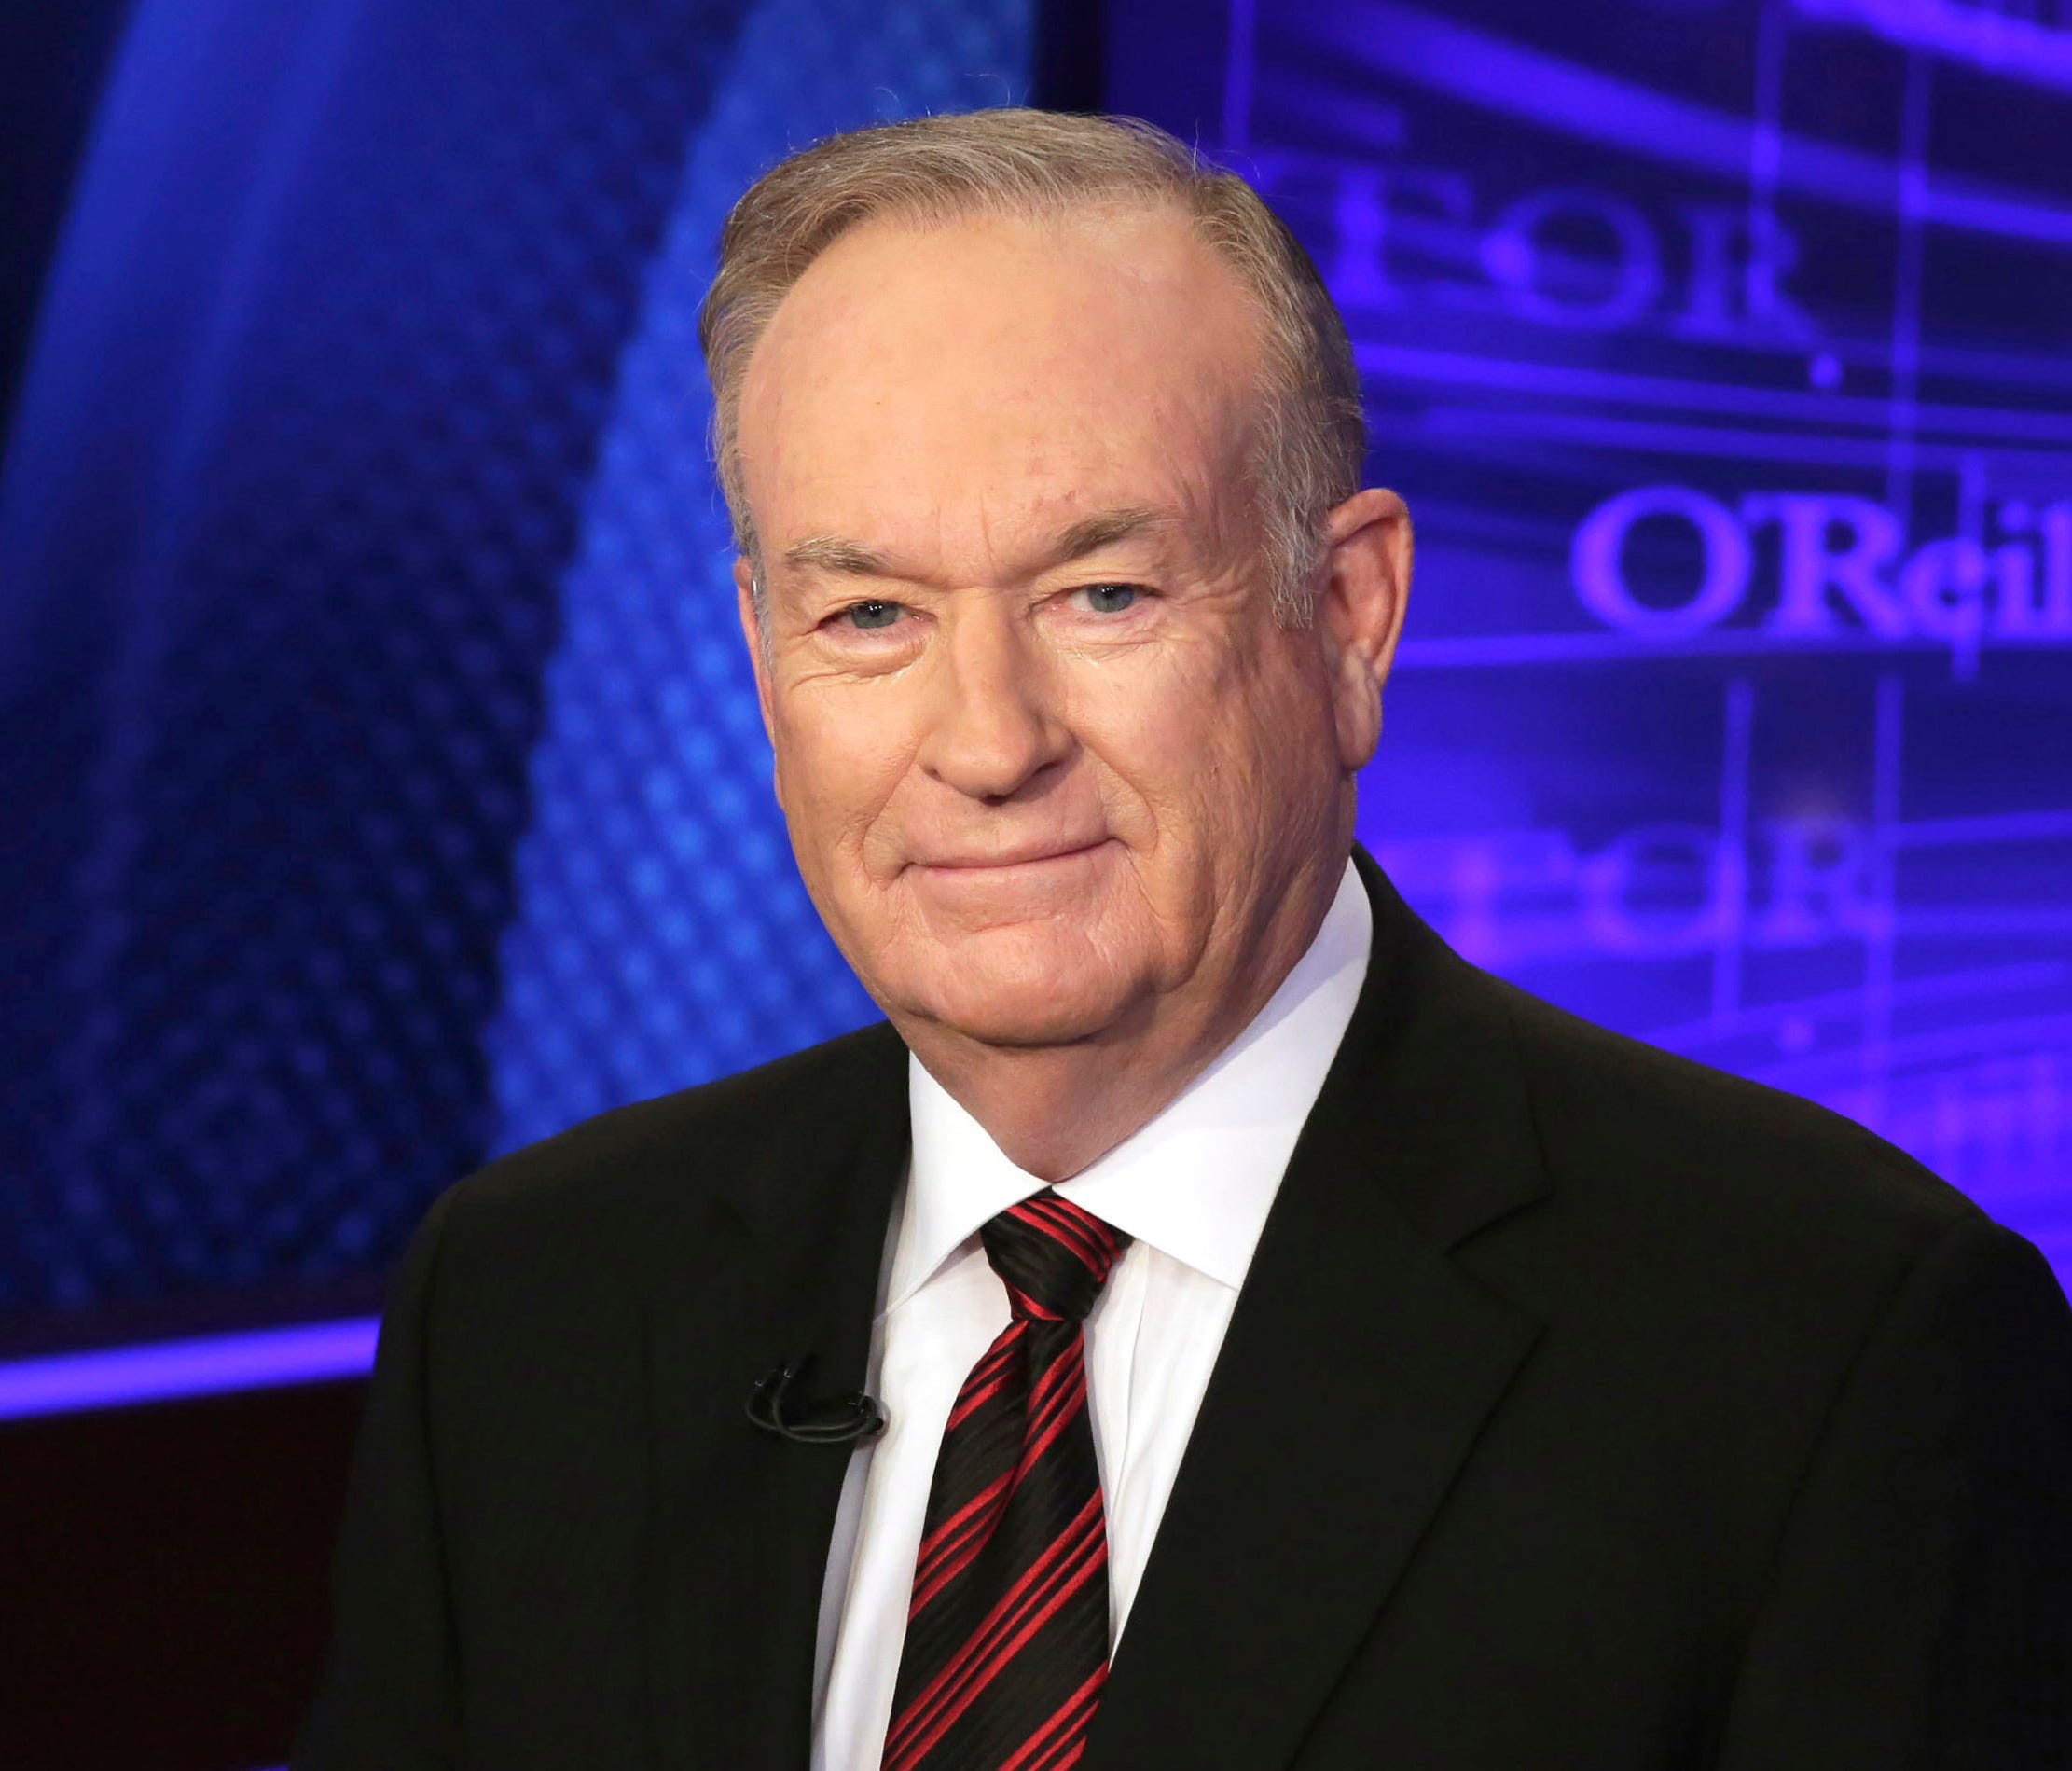 In this Oct. 1, 2015 file photo, Bill O'Reilly of the Fox News Channel program 